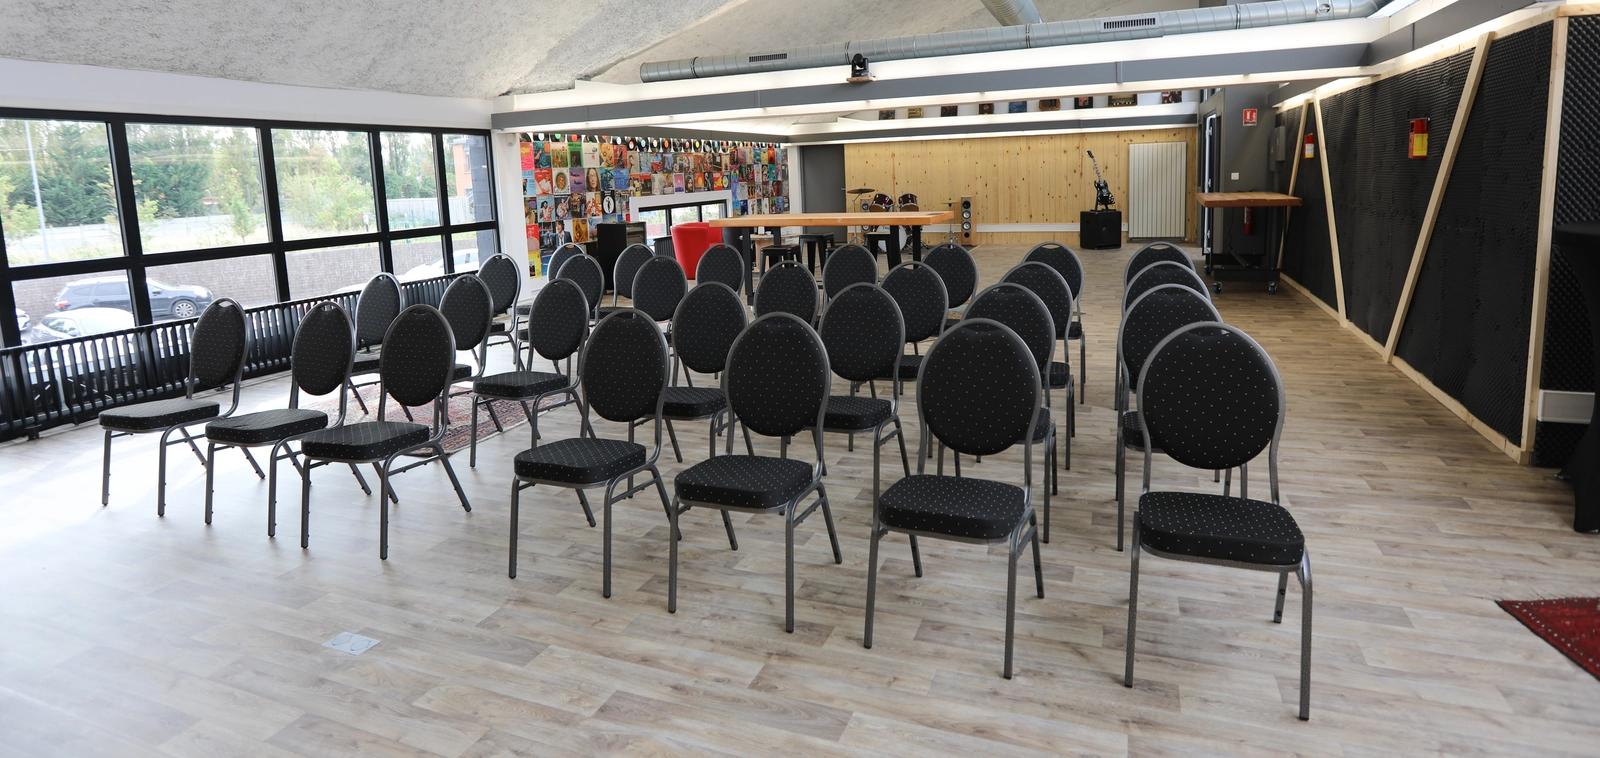 Space L'universal: Large, bright meeting room - 4